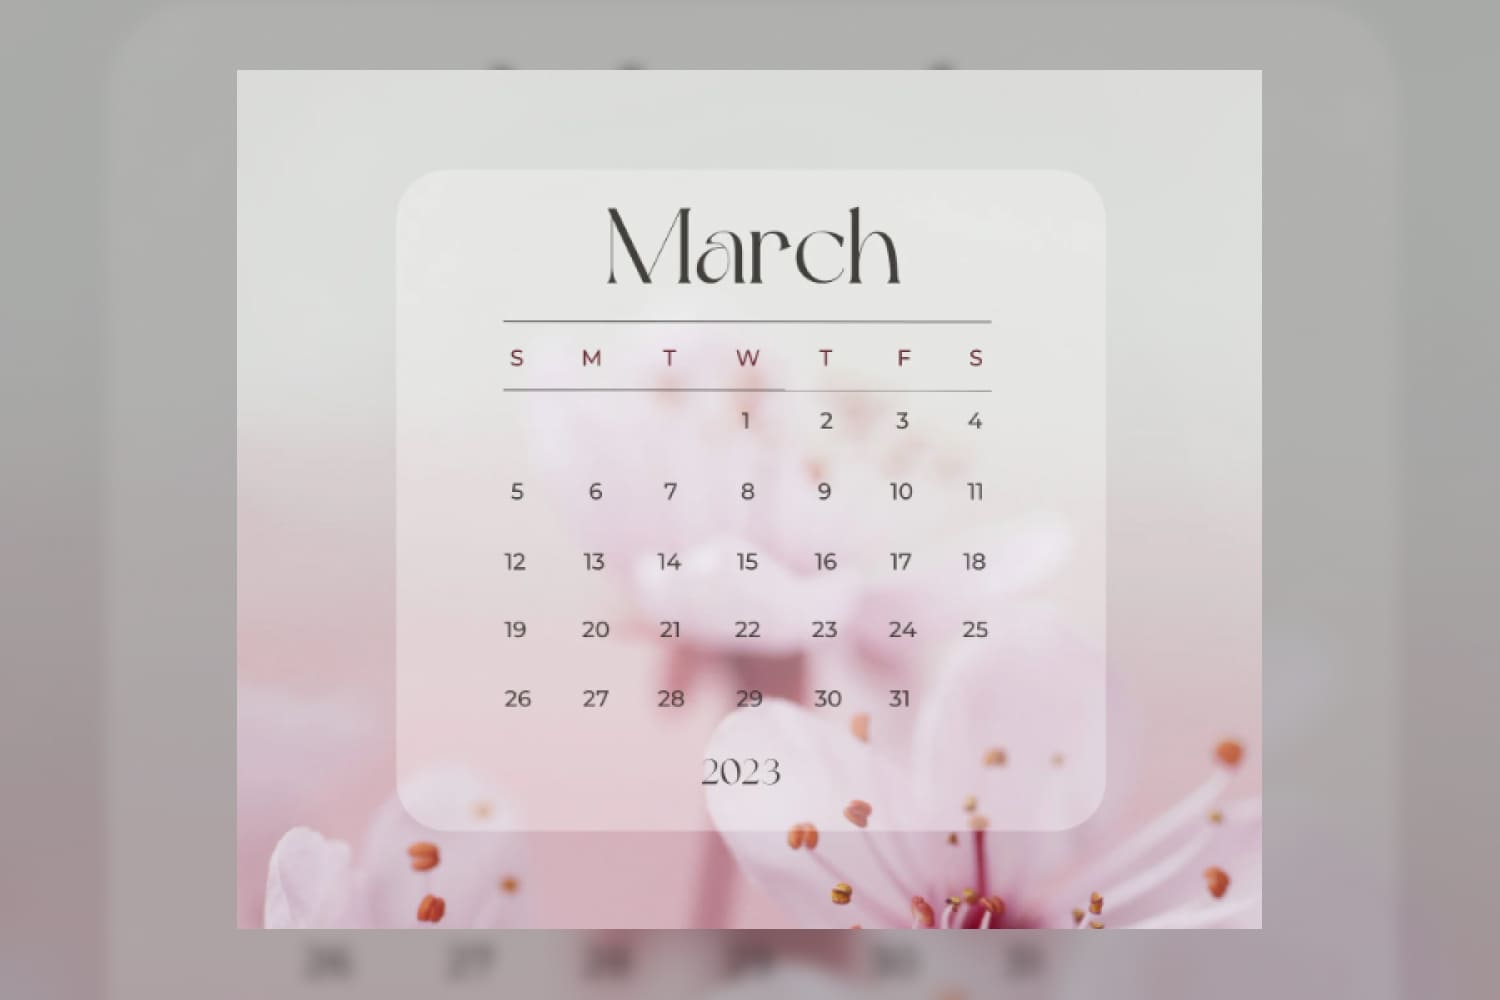 March calendar with a delicate pink and gray color palette with a minimalist layout.